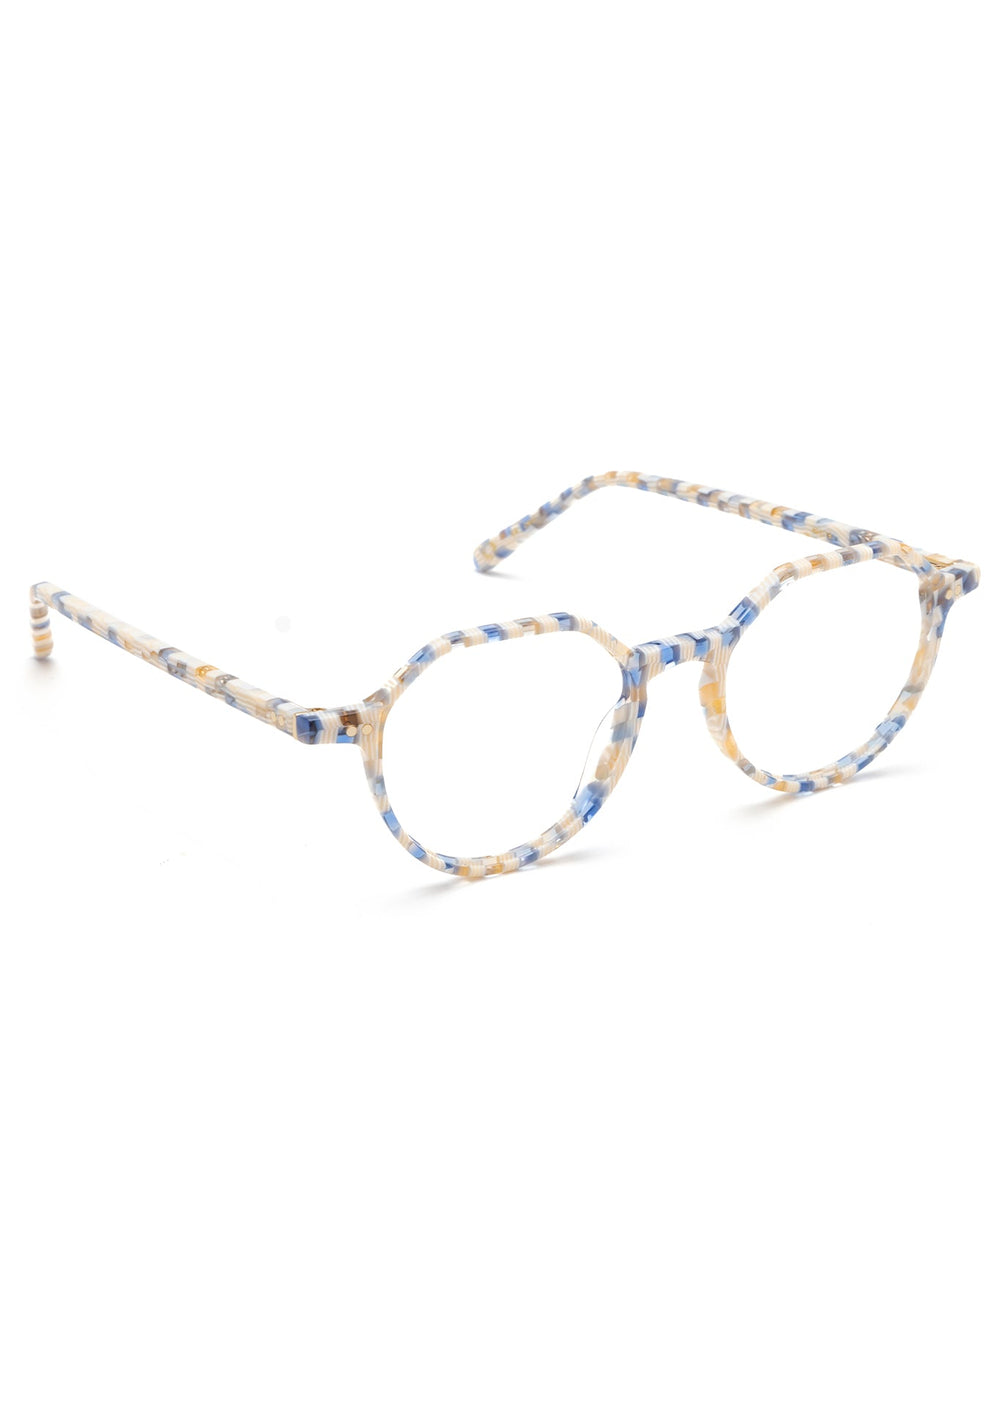 KREWE EYEGLASSES - JOEL | Pincheck handcrafted, luxury blue and white checkered round glasses